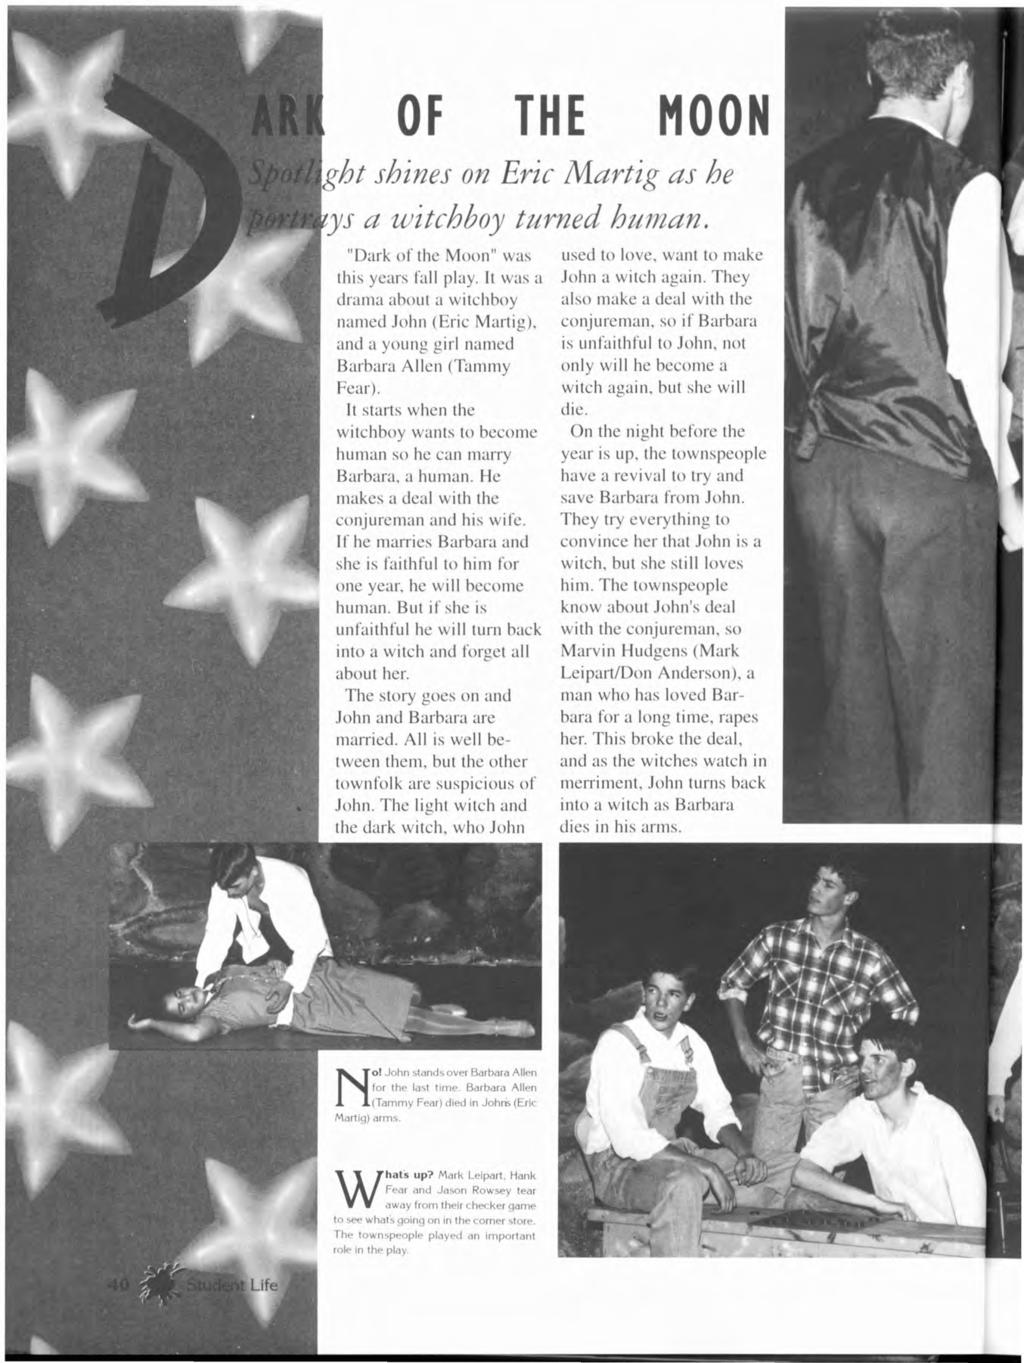 OF "Dark of the Moon" was this years fall play. It was a drama about a witchboy named John (Eric Martig), and a young girl named Barbara Allen (Tammy Fear).